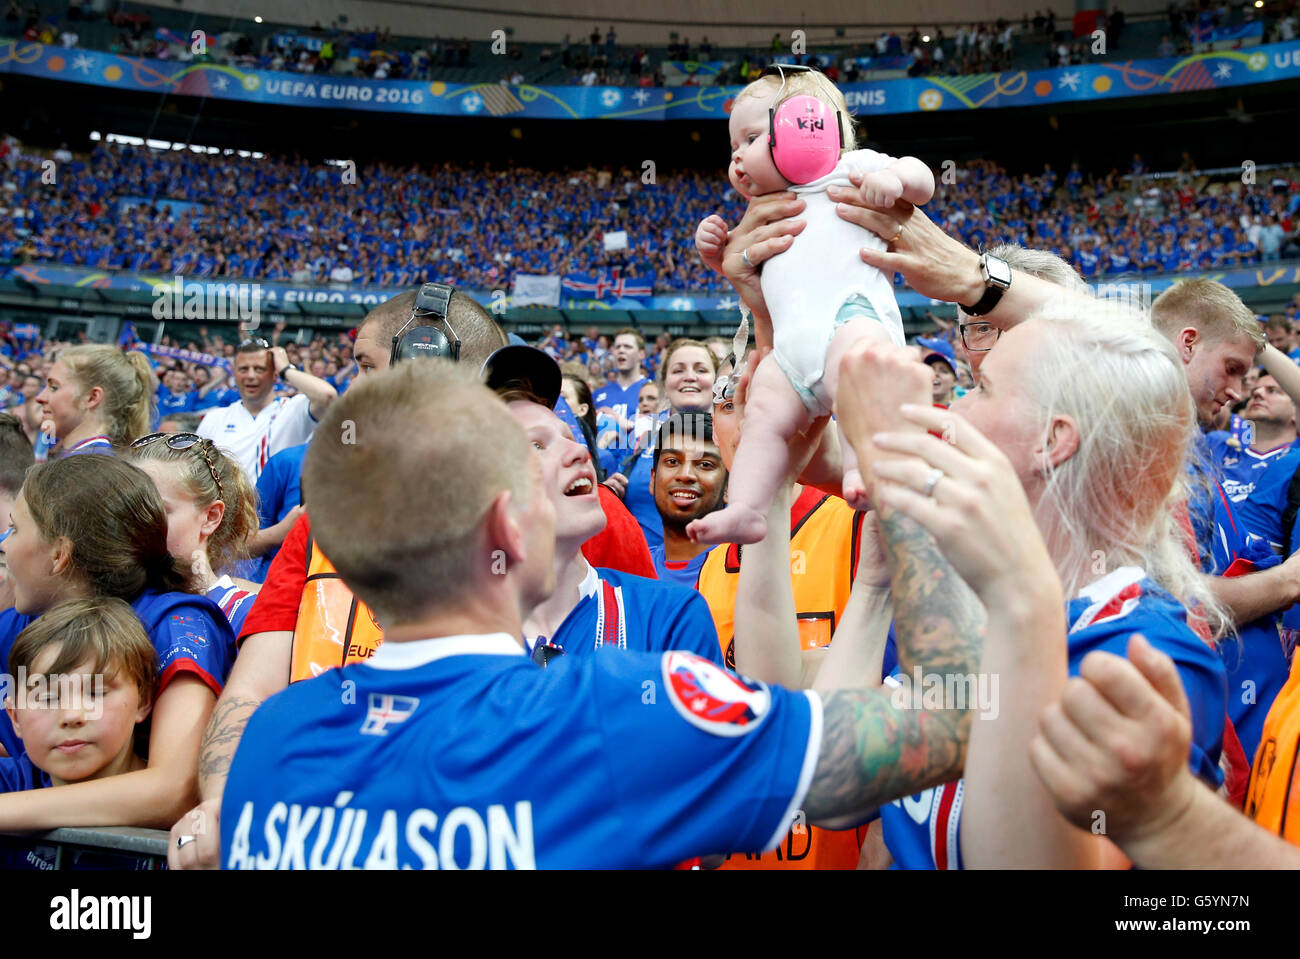 Iceland's Ari Freyr Skulason is handed a baby from the crowd as he celebrates qualifying for the last 16 round after the Euro 2016, Group F match at the Stade de France, Paris. after qualifying for the last 16 round after the Euro 2016, Group F match at the Stade de France, Paris. Stock Photo